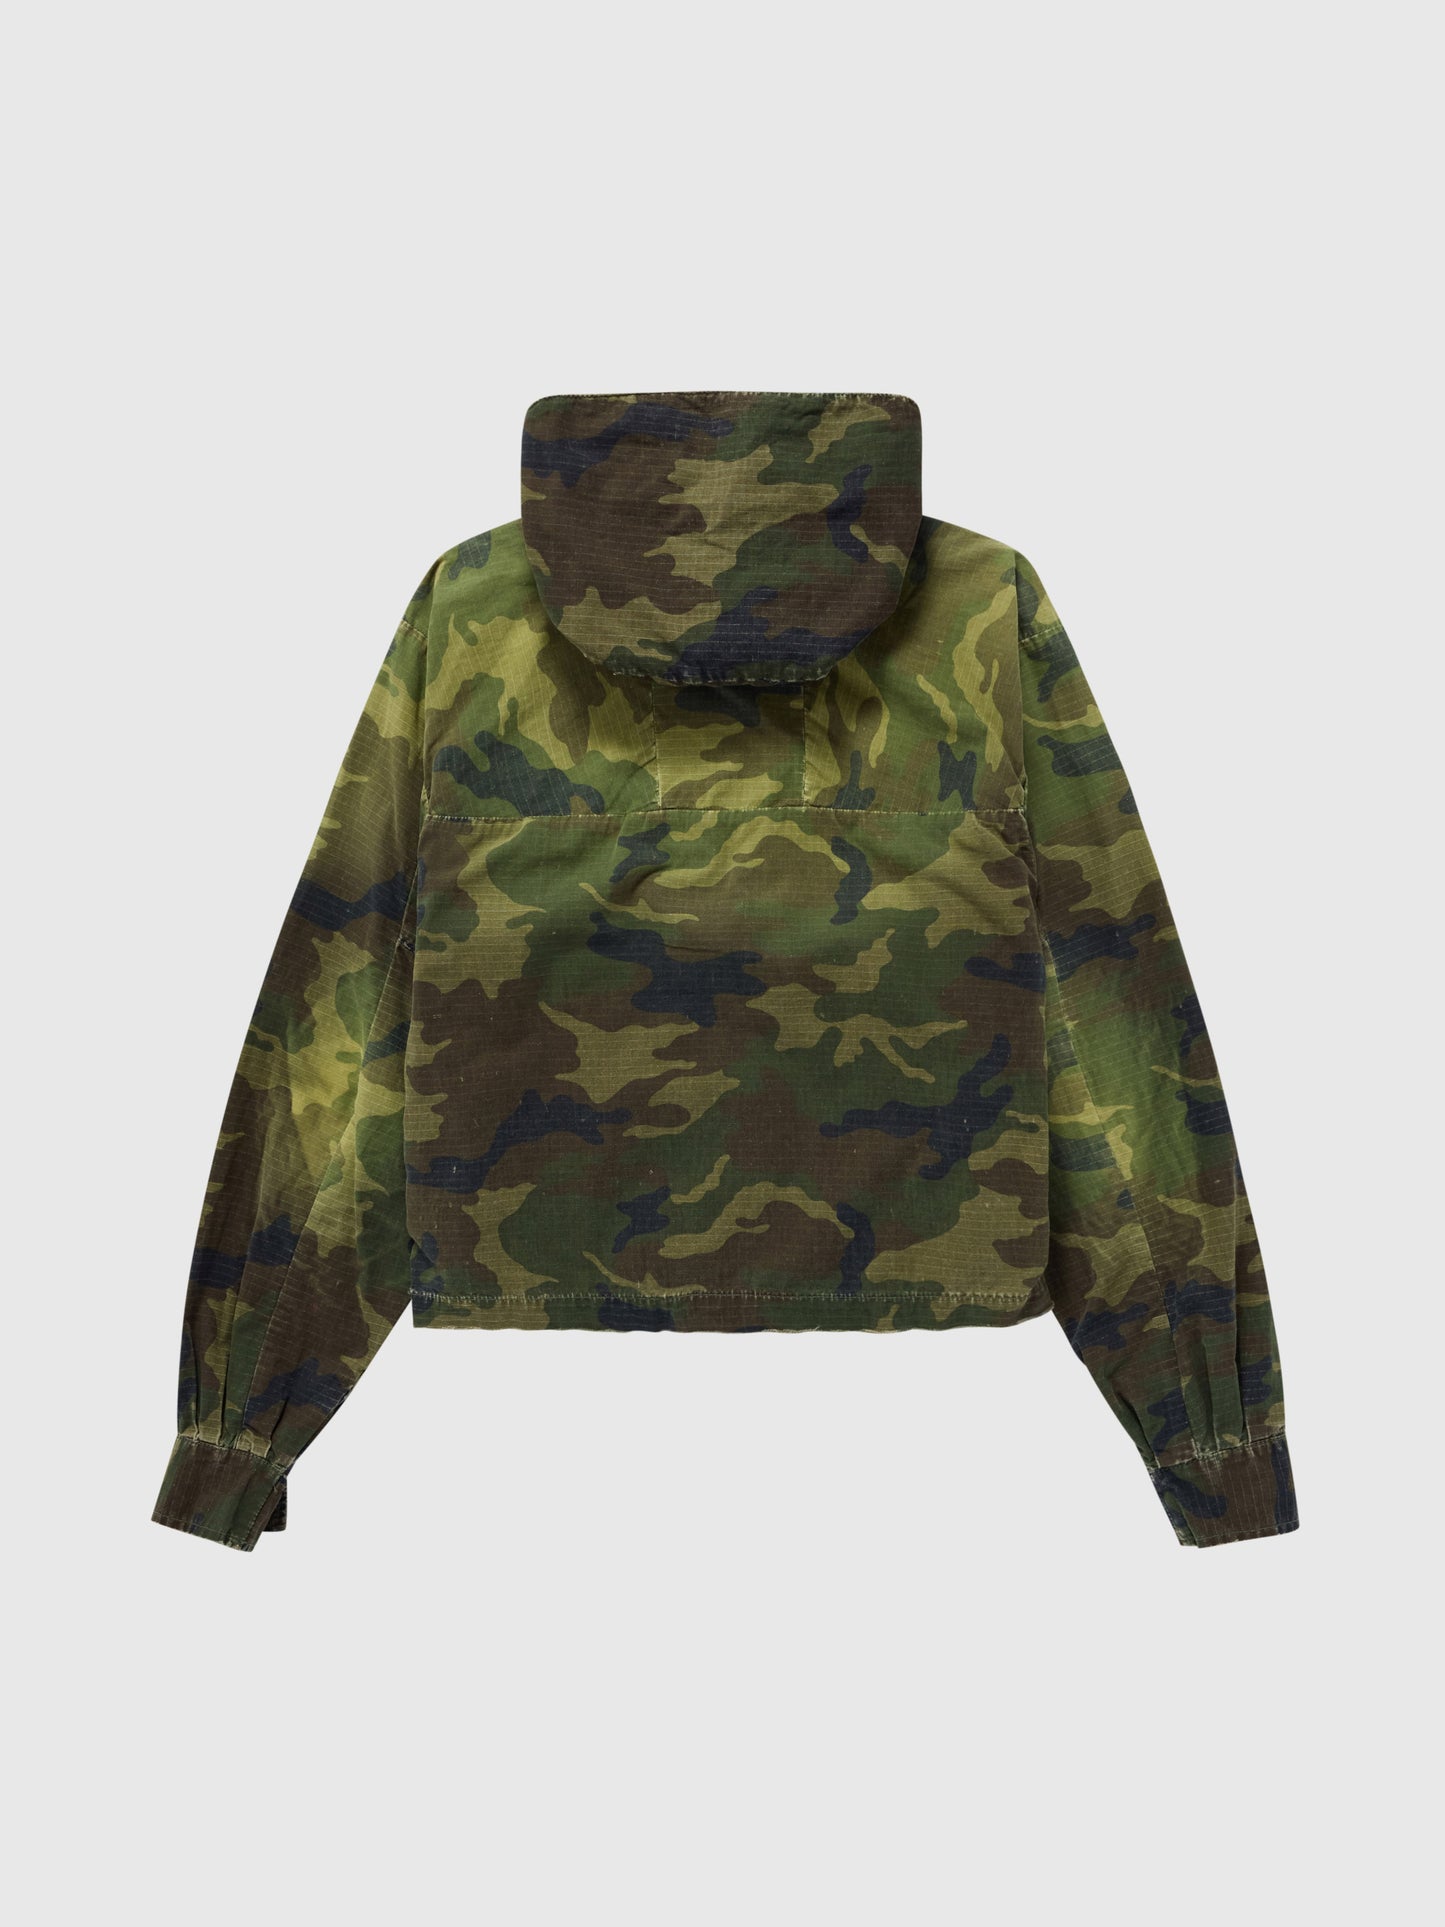 Hooded Jacket in Camo